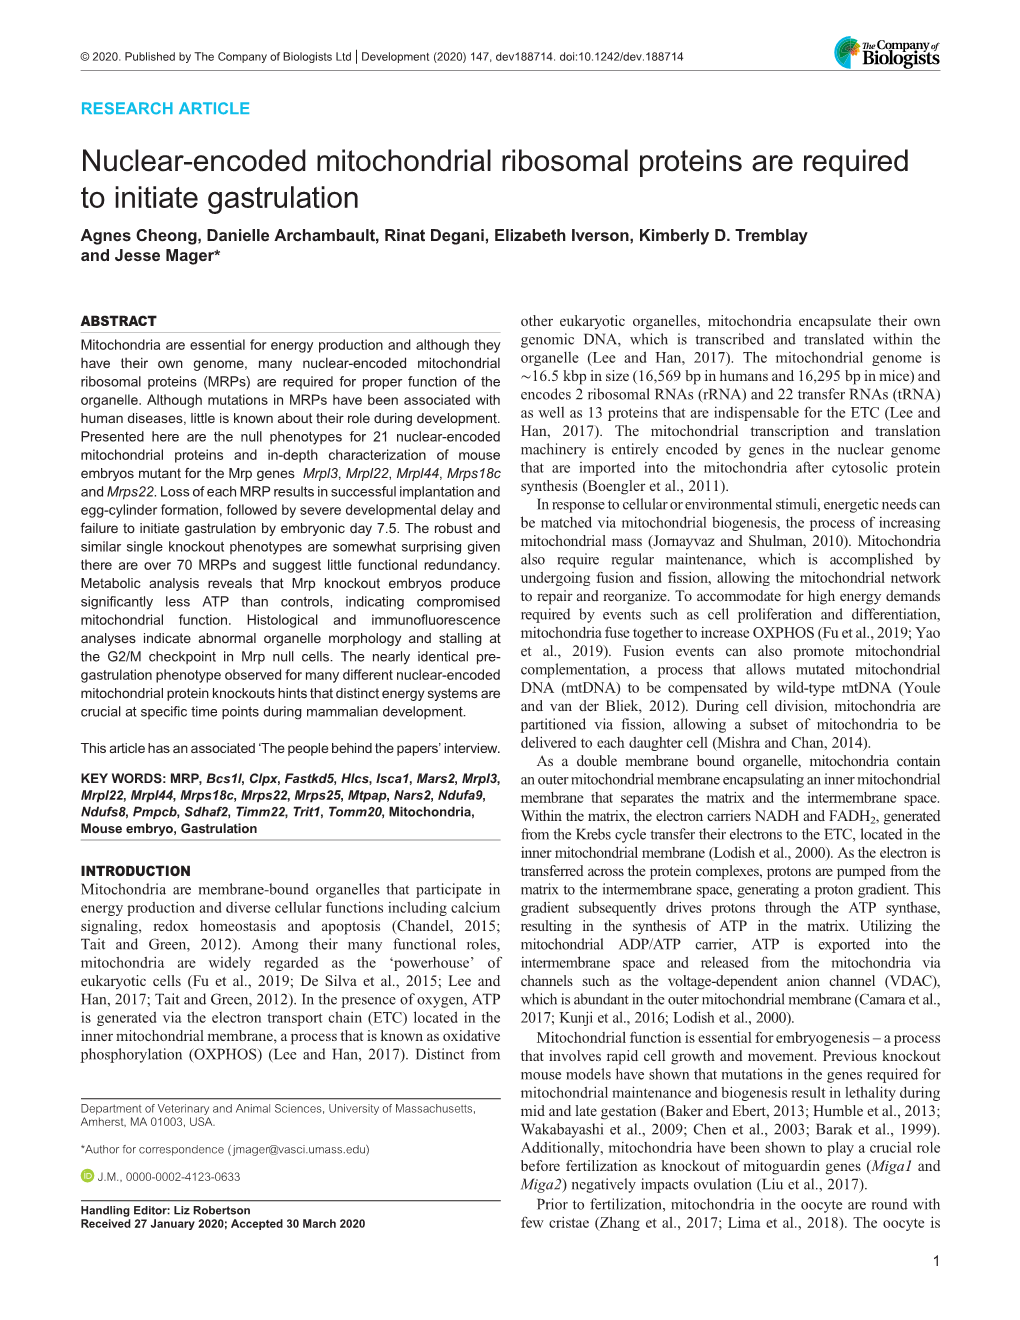 Nuclear-Encoded Mitochondrial Ribosomal Proteins Are Required to Initiate Gastrulation Agnes Cheong, Danielle Archambault, Rinat Degani, Elizabeth Iverson, Kimberly D